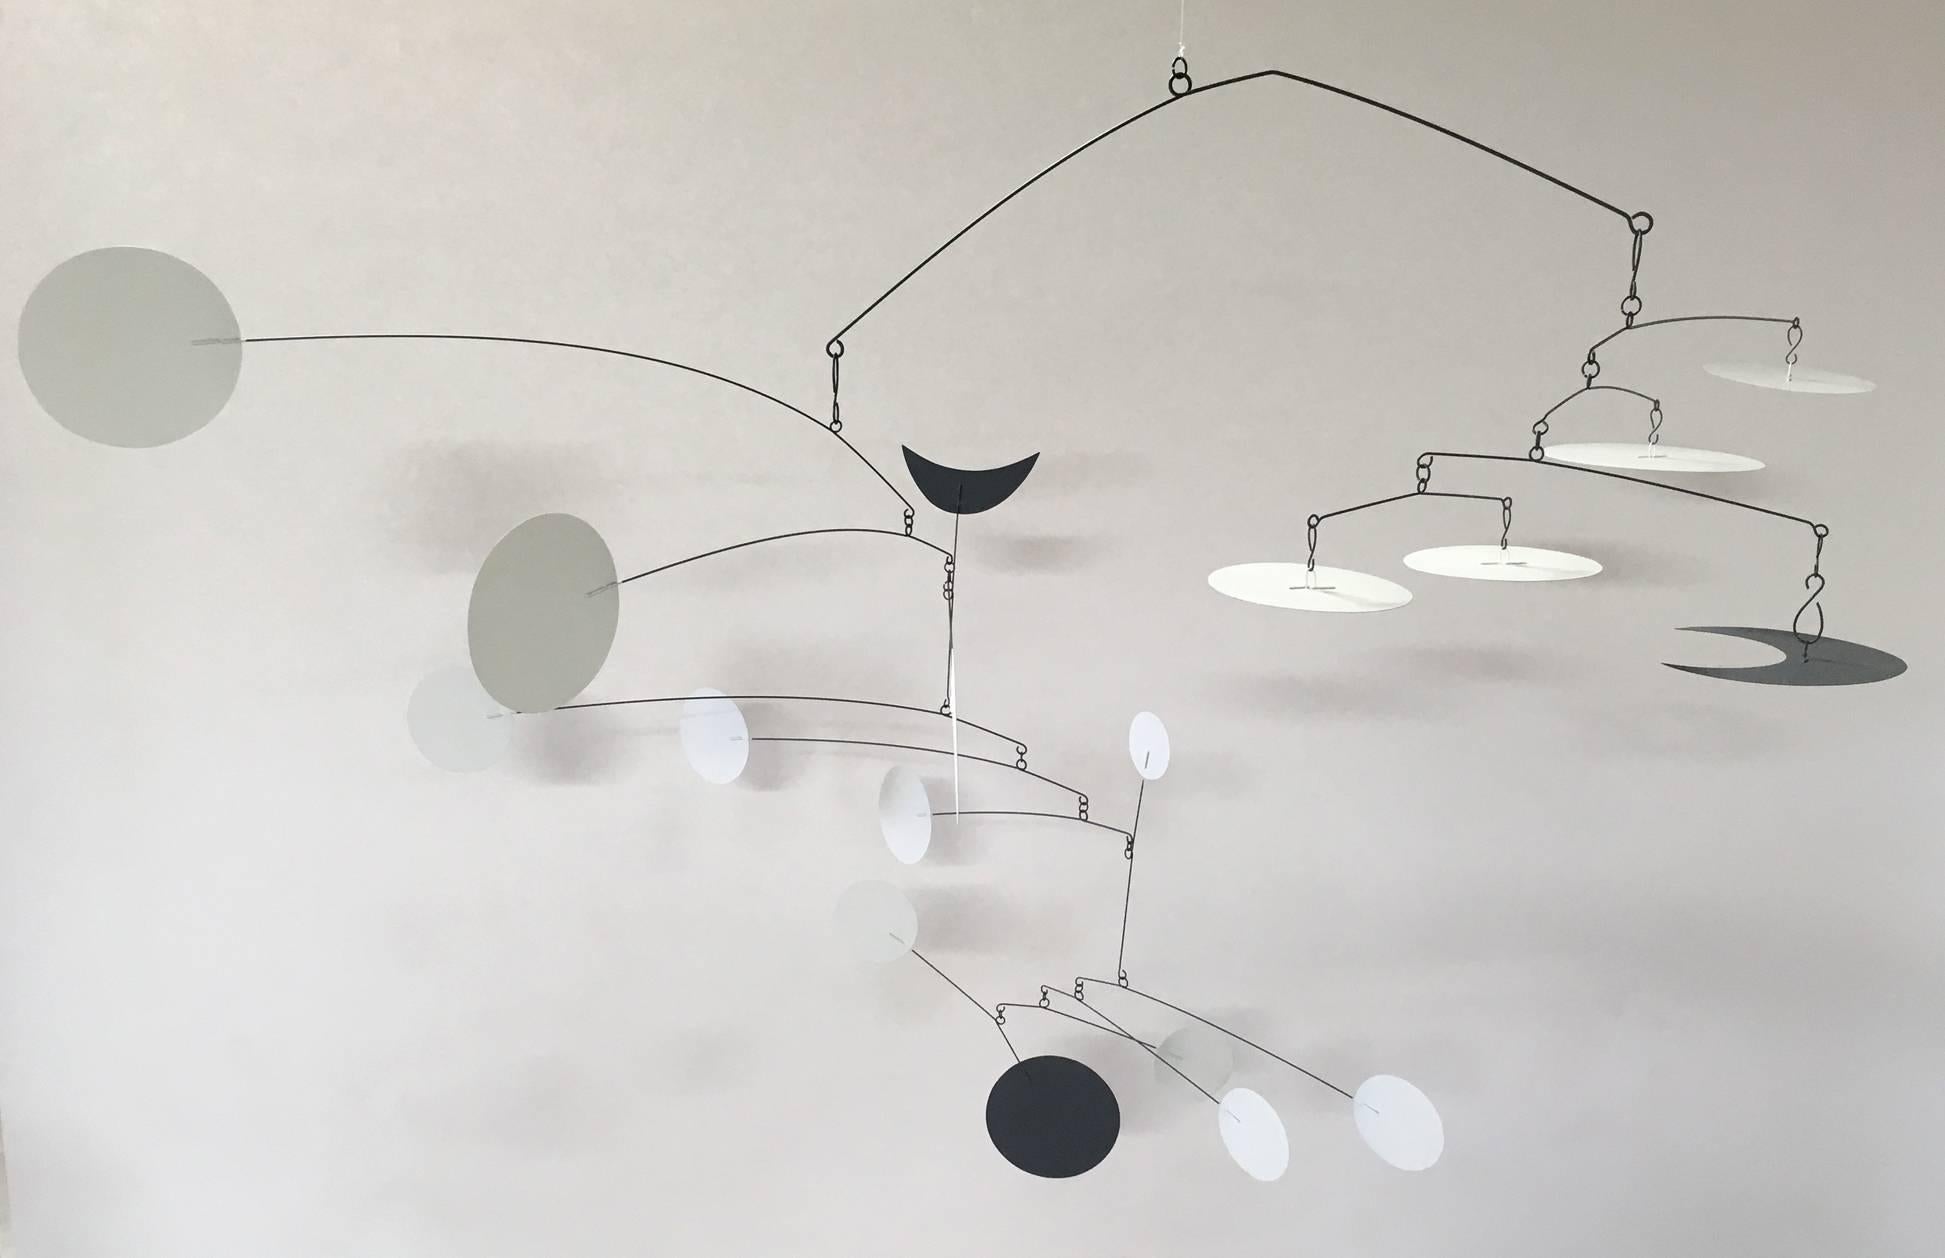 A very large Kinetic mobile designed by a California artist, who remains anonymous, with inspiration from Alexander Calder. This massive Kinetic mobile is comprised of metal wire and thin metal circular and crescent paddles; powder-coated white and